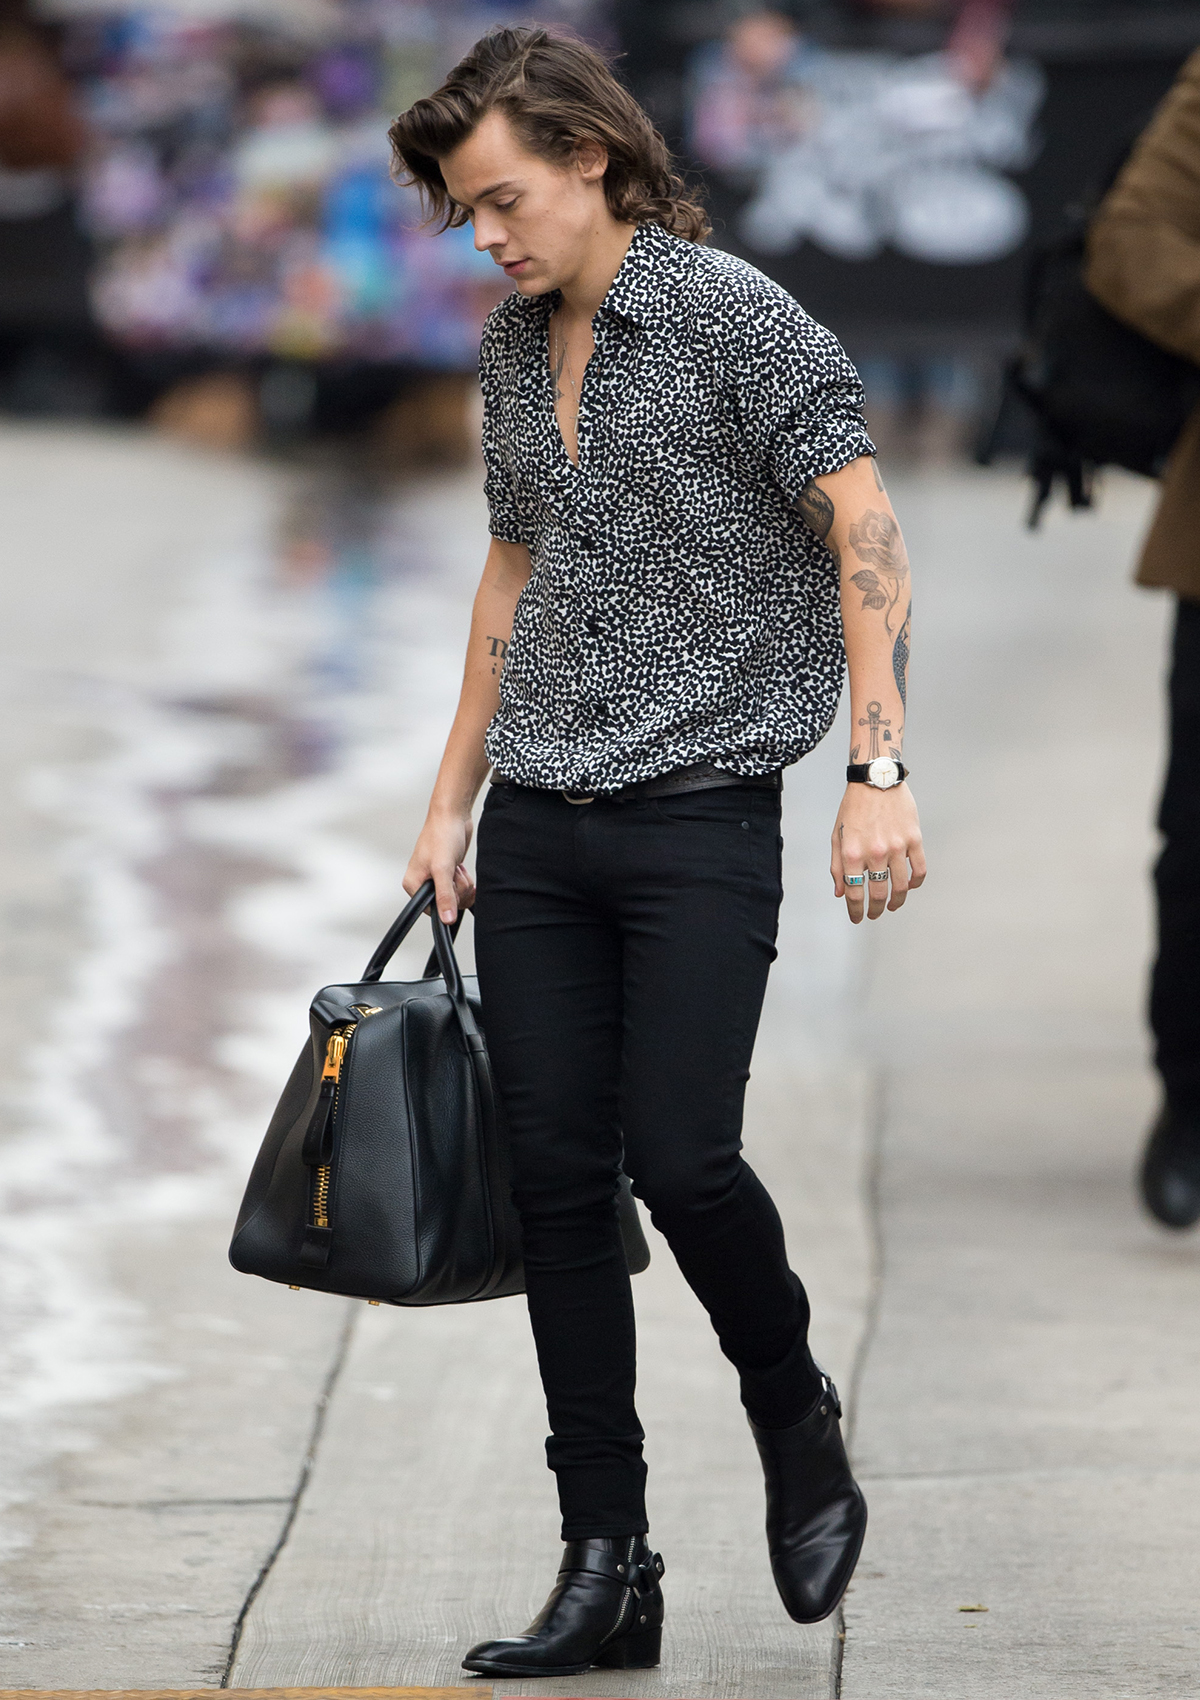 Share more than 90 harry styles leather bag - esthdonghoadian